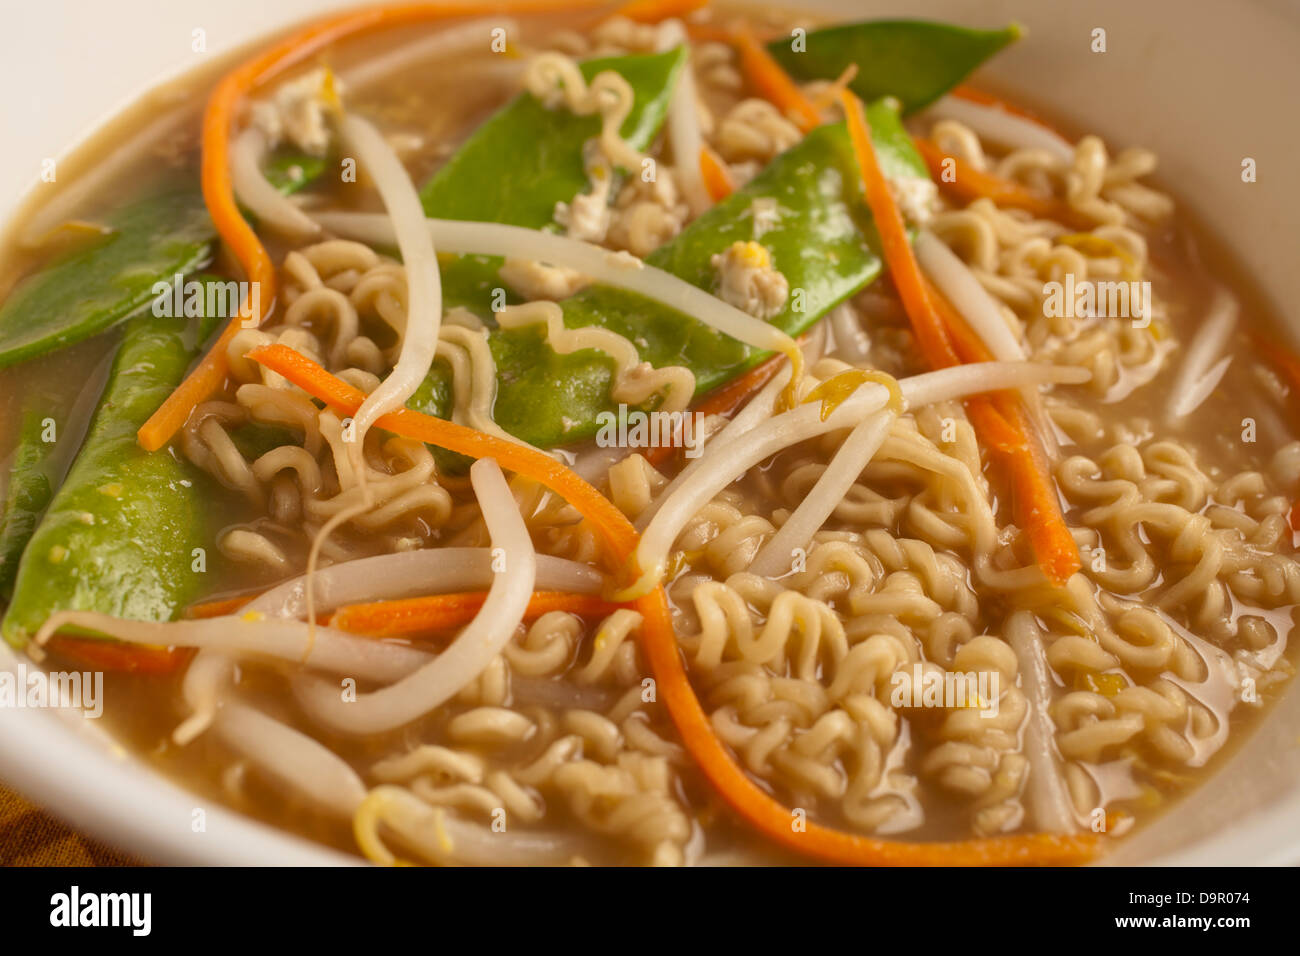 Bowl of instant ramen with added vegetables Stock Photo